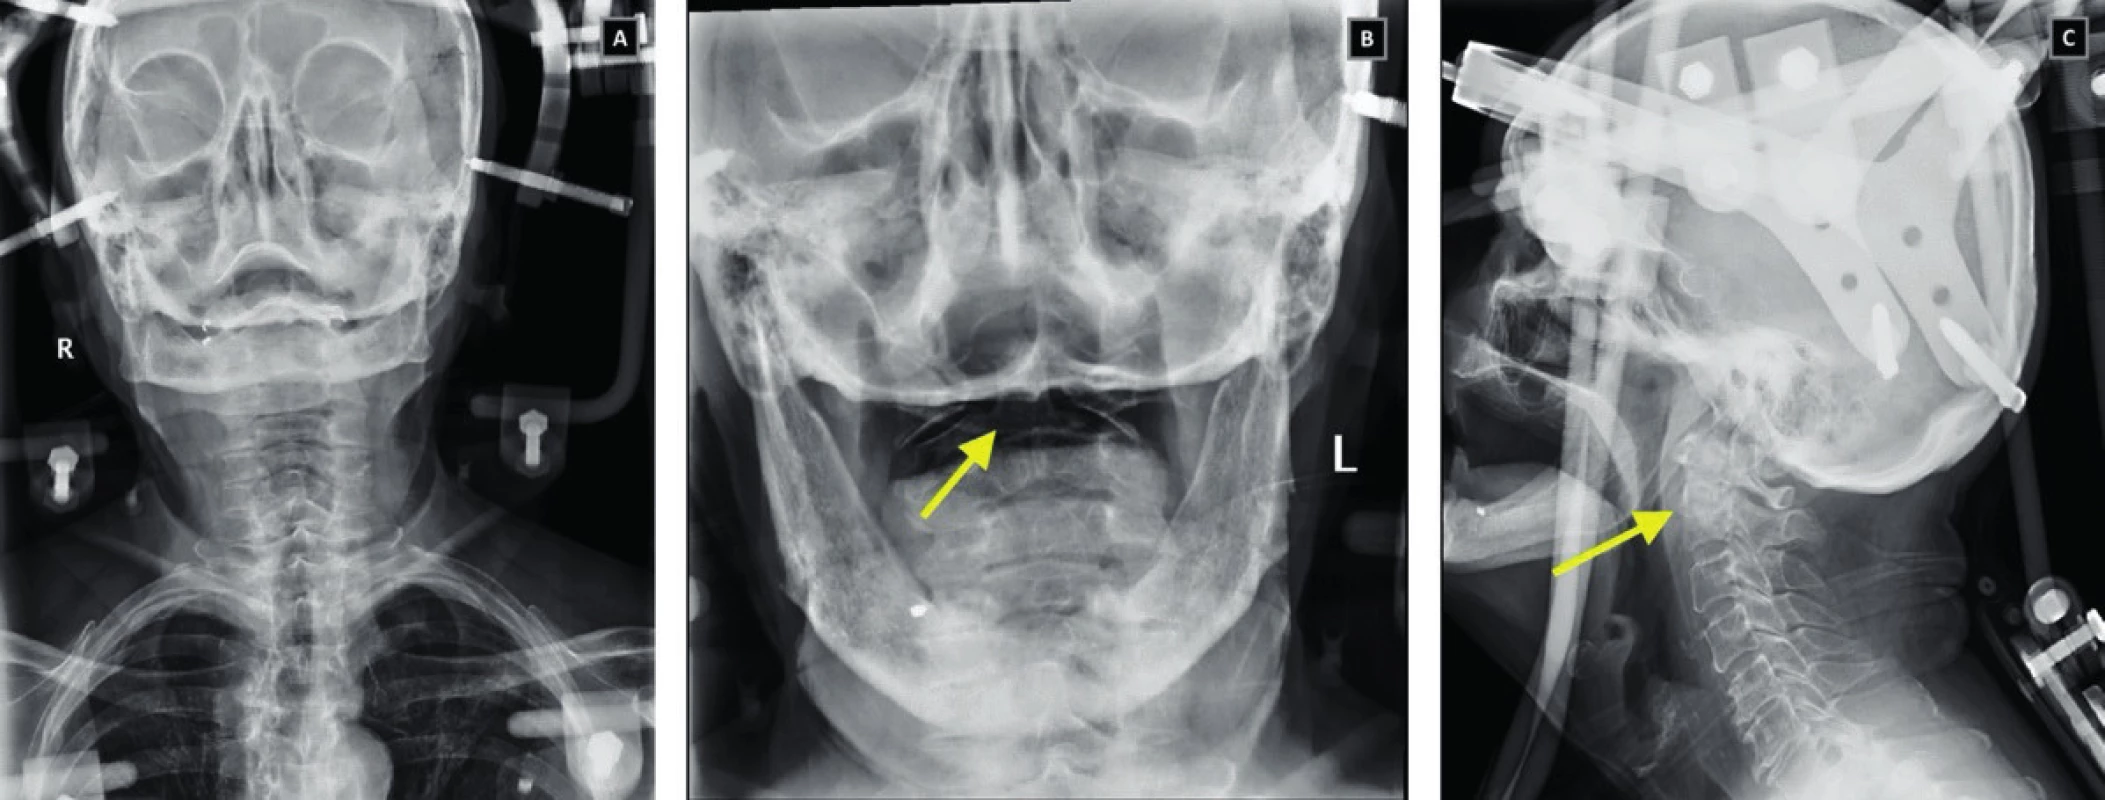 Cervical spine x-ray images in AP (A), transoral (B) and lateral (C) projection in a patient with the fracture of dens treated by means of the Halo fixation. The arrow shows the location of the fracture